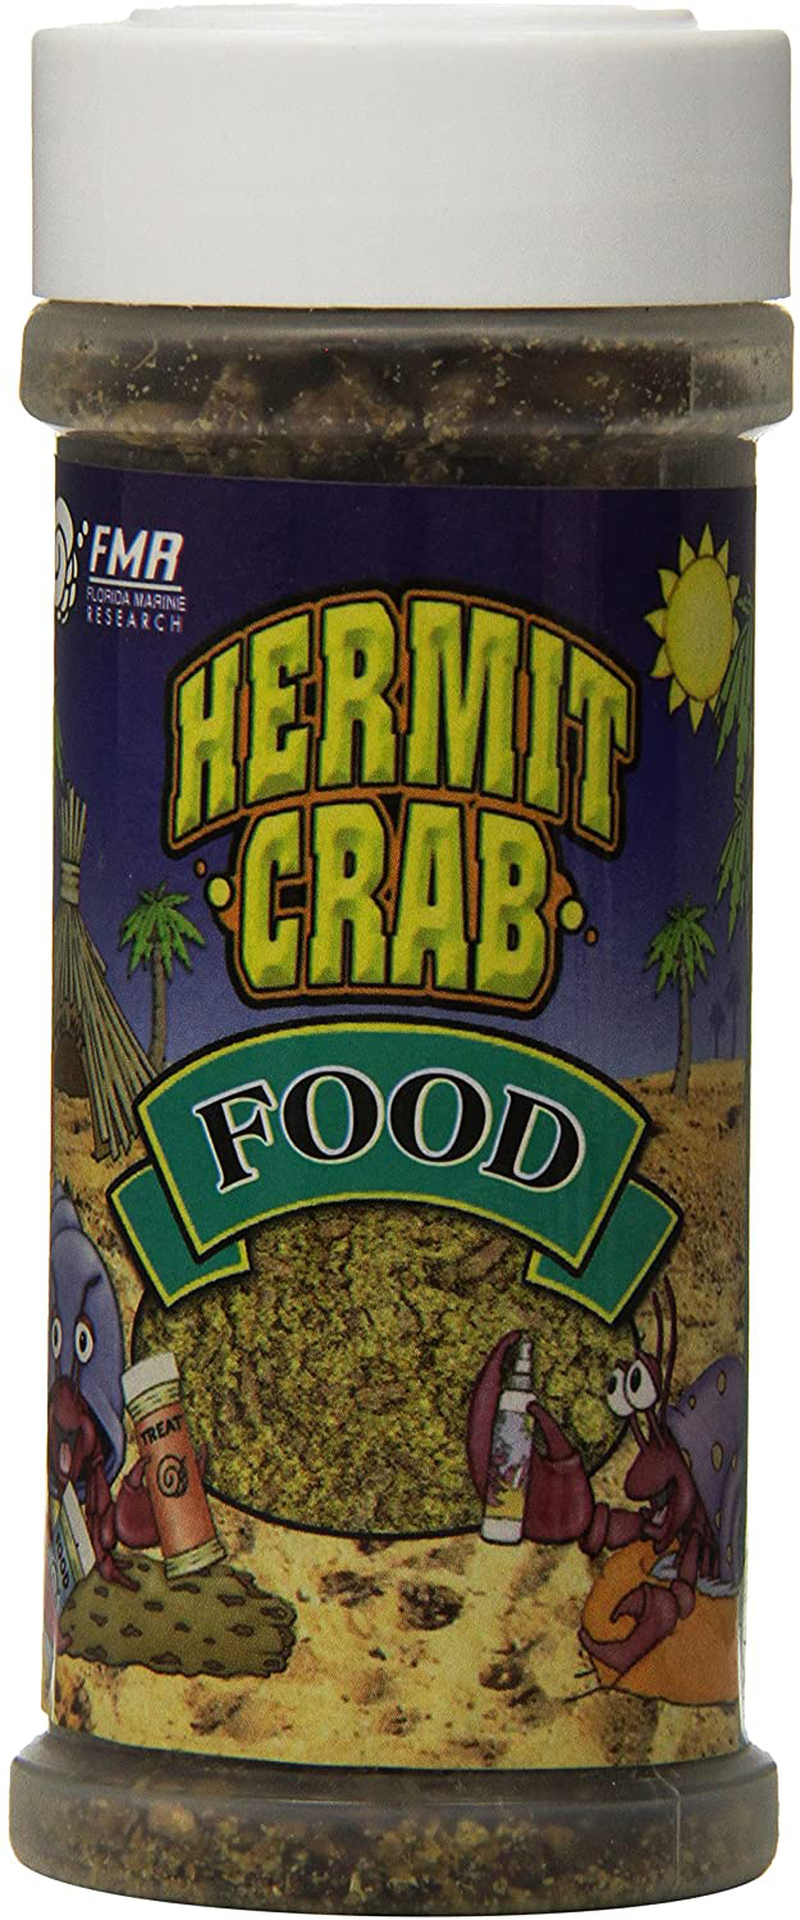 Florida Marine Research Sfm00005 Hermit Crab Food, 4-Ounce Animals & Pet Supplies > Pet Supplies > Small Animal Supplies > Small Animal Food Florida Marine Research   